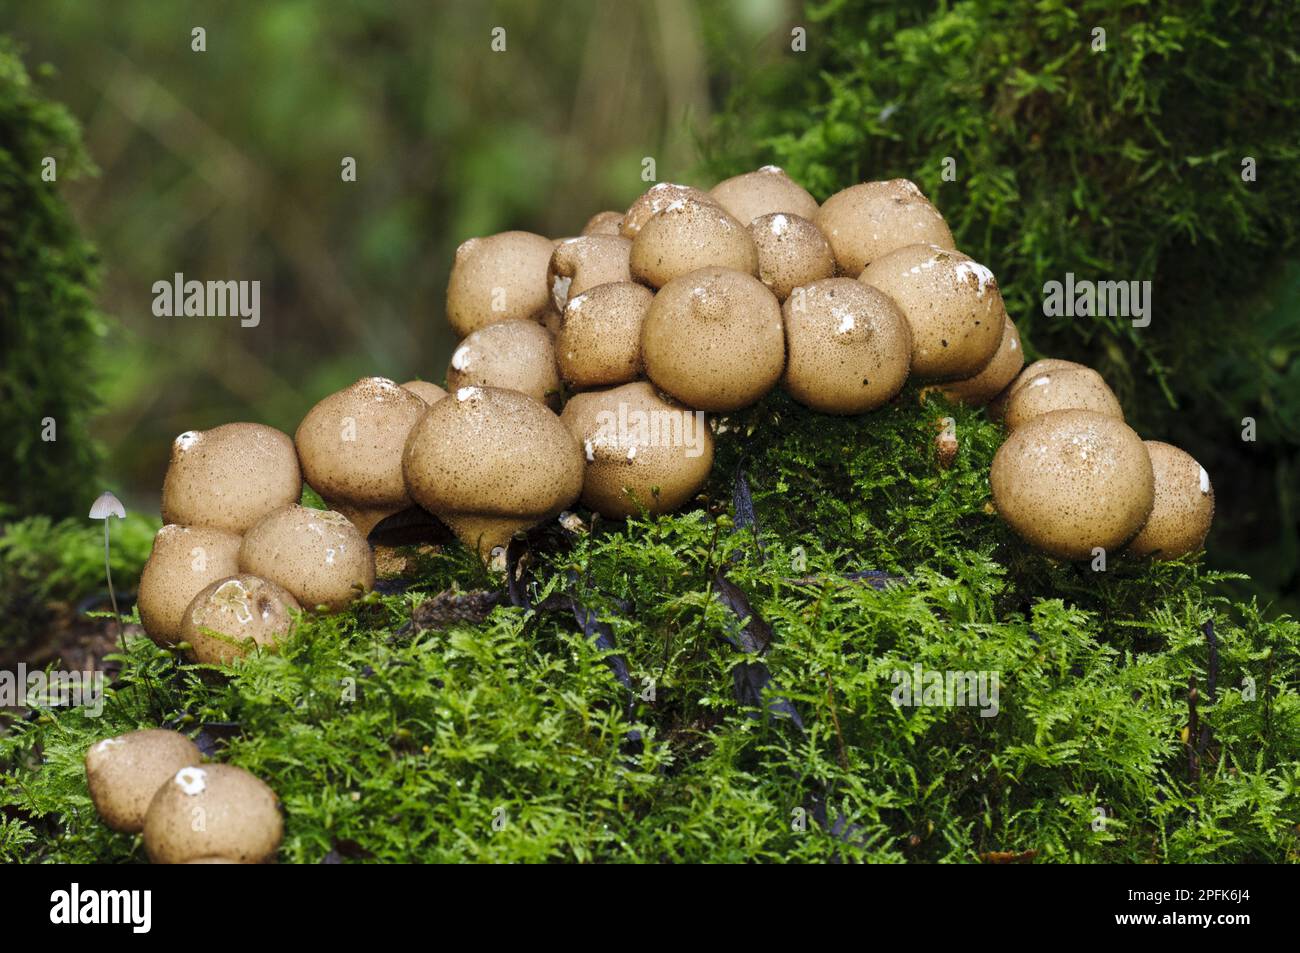 Stump Puffball (Lycoperdon pyriforme) fruiting bodies, group growing on moss covered tree stump, Potteric Carr Nature Reserve, South Yorkshire Stock Photo